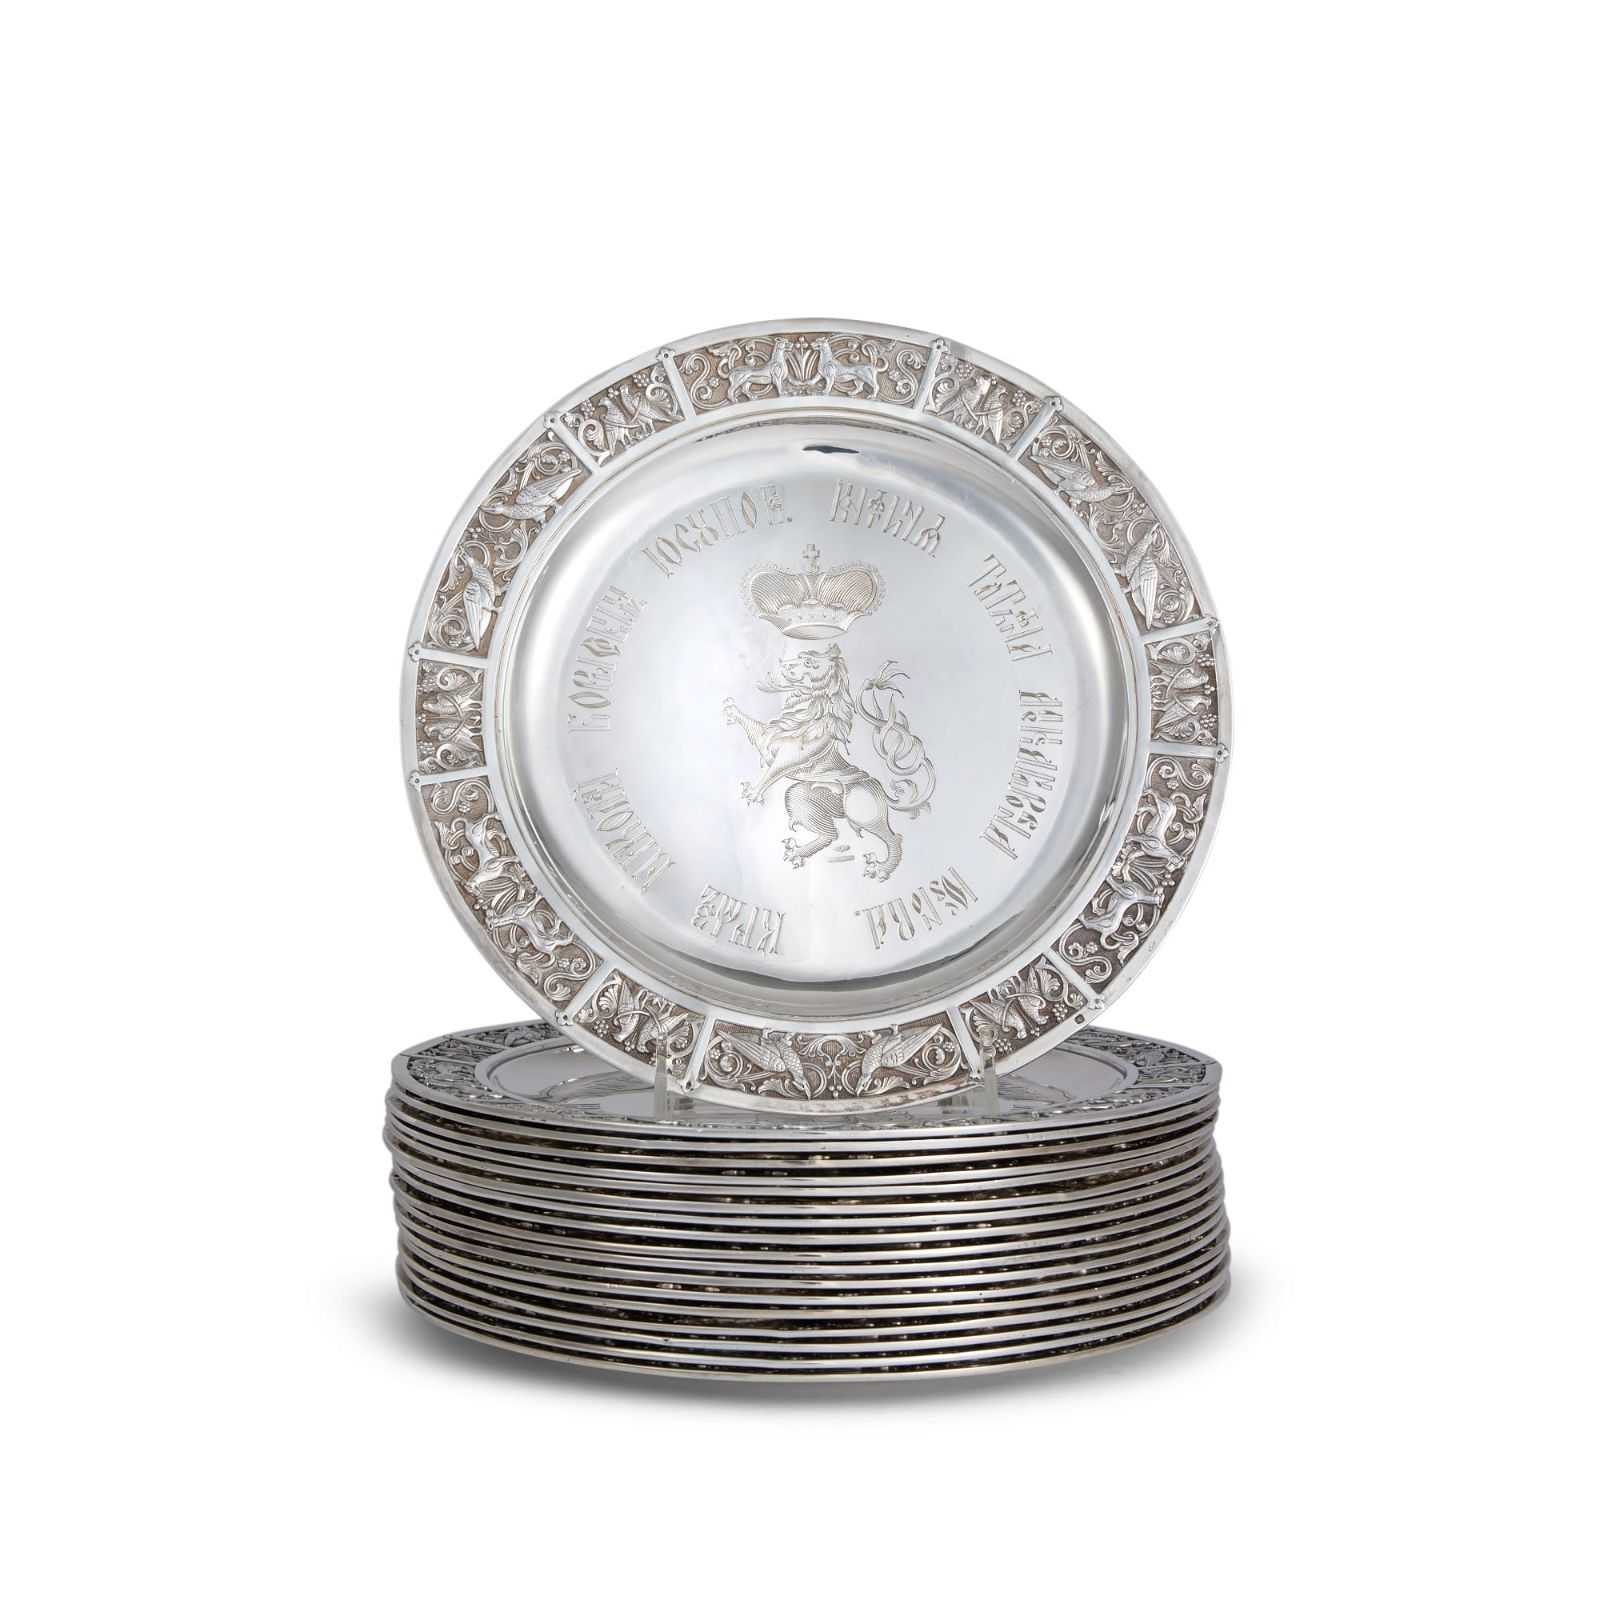 Set of 18 French Second Empire silver dinner plates by Alex Gueyton from the Youssoupov Scandinavian service, estimated at $50,000-$80,000 at Sotheby’s.